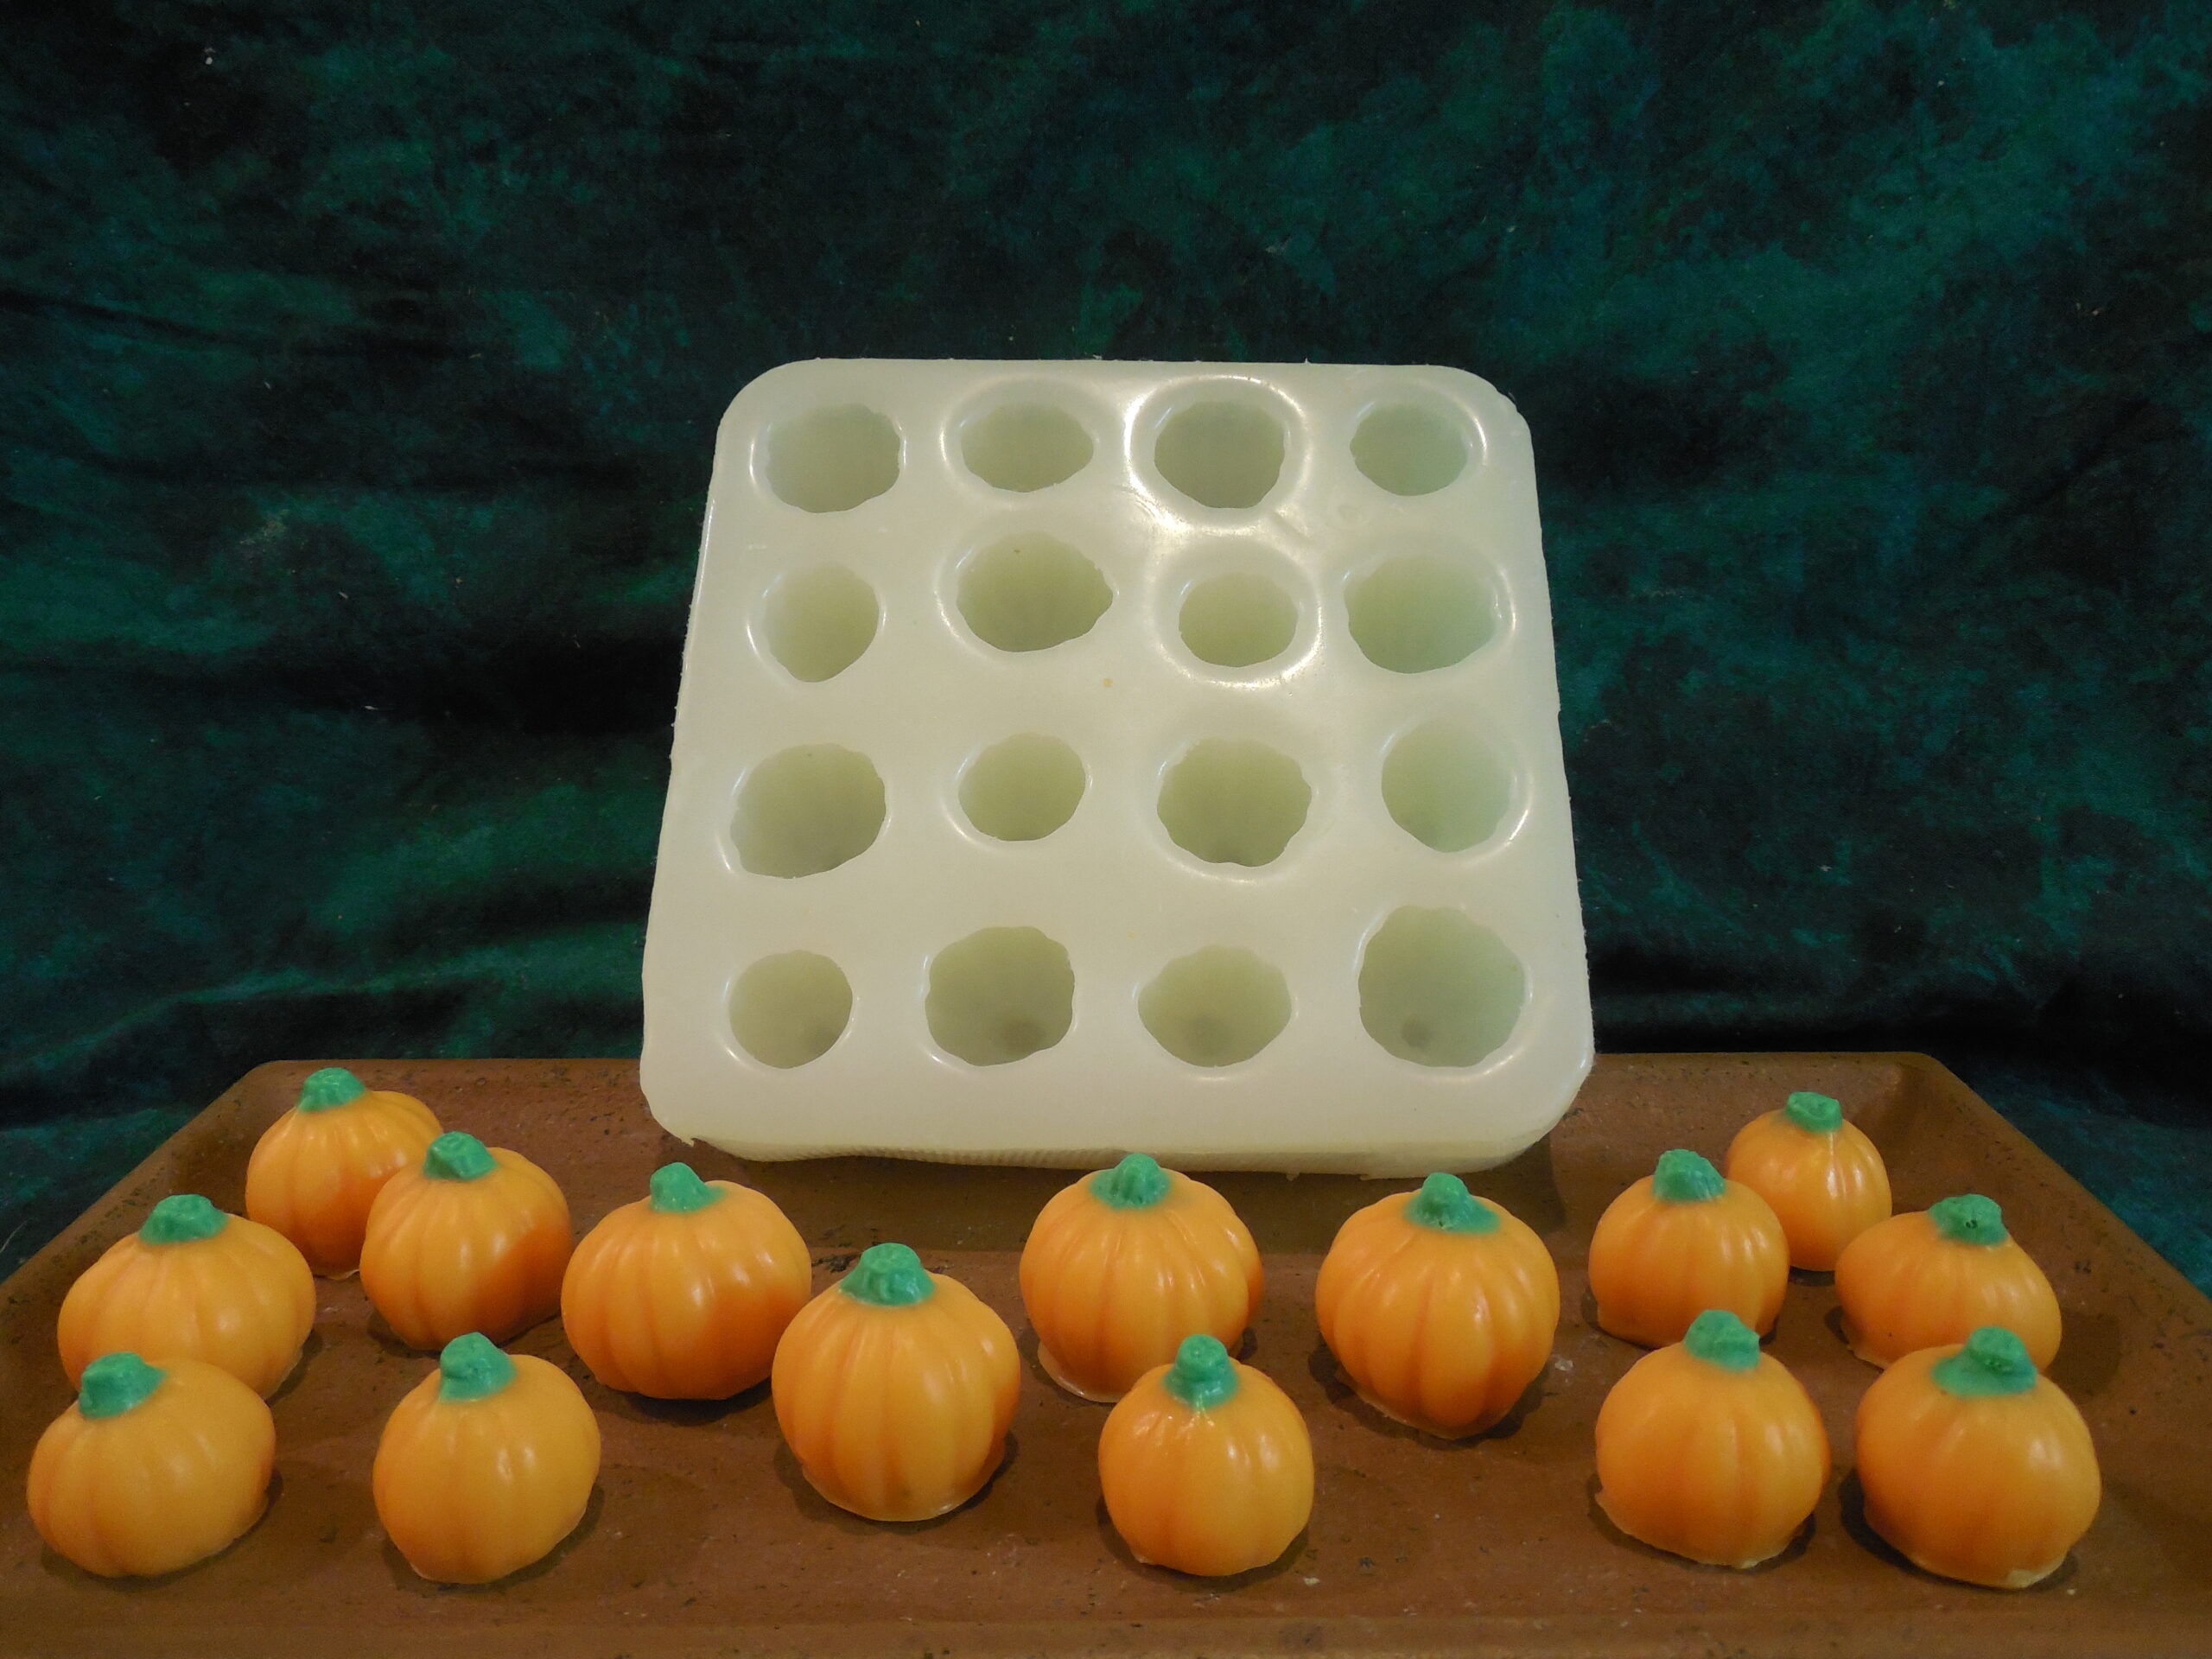 https://www.vanyulay.com/wp-content/uploads/2016/08/Pumpkin-Silicone-Mold-5085-1-scaled.jpg